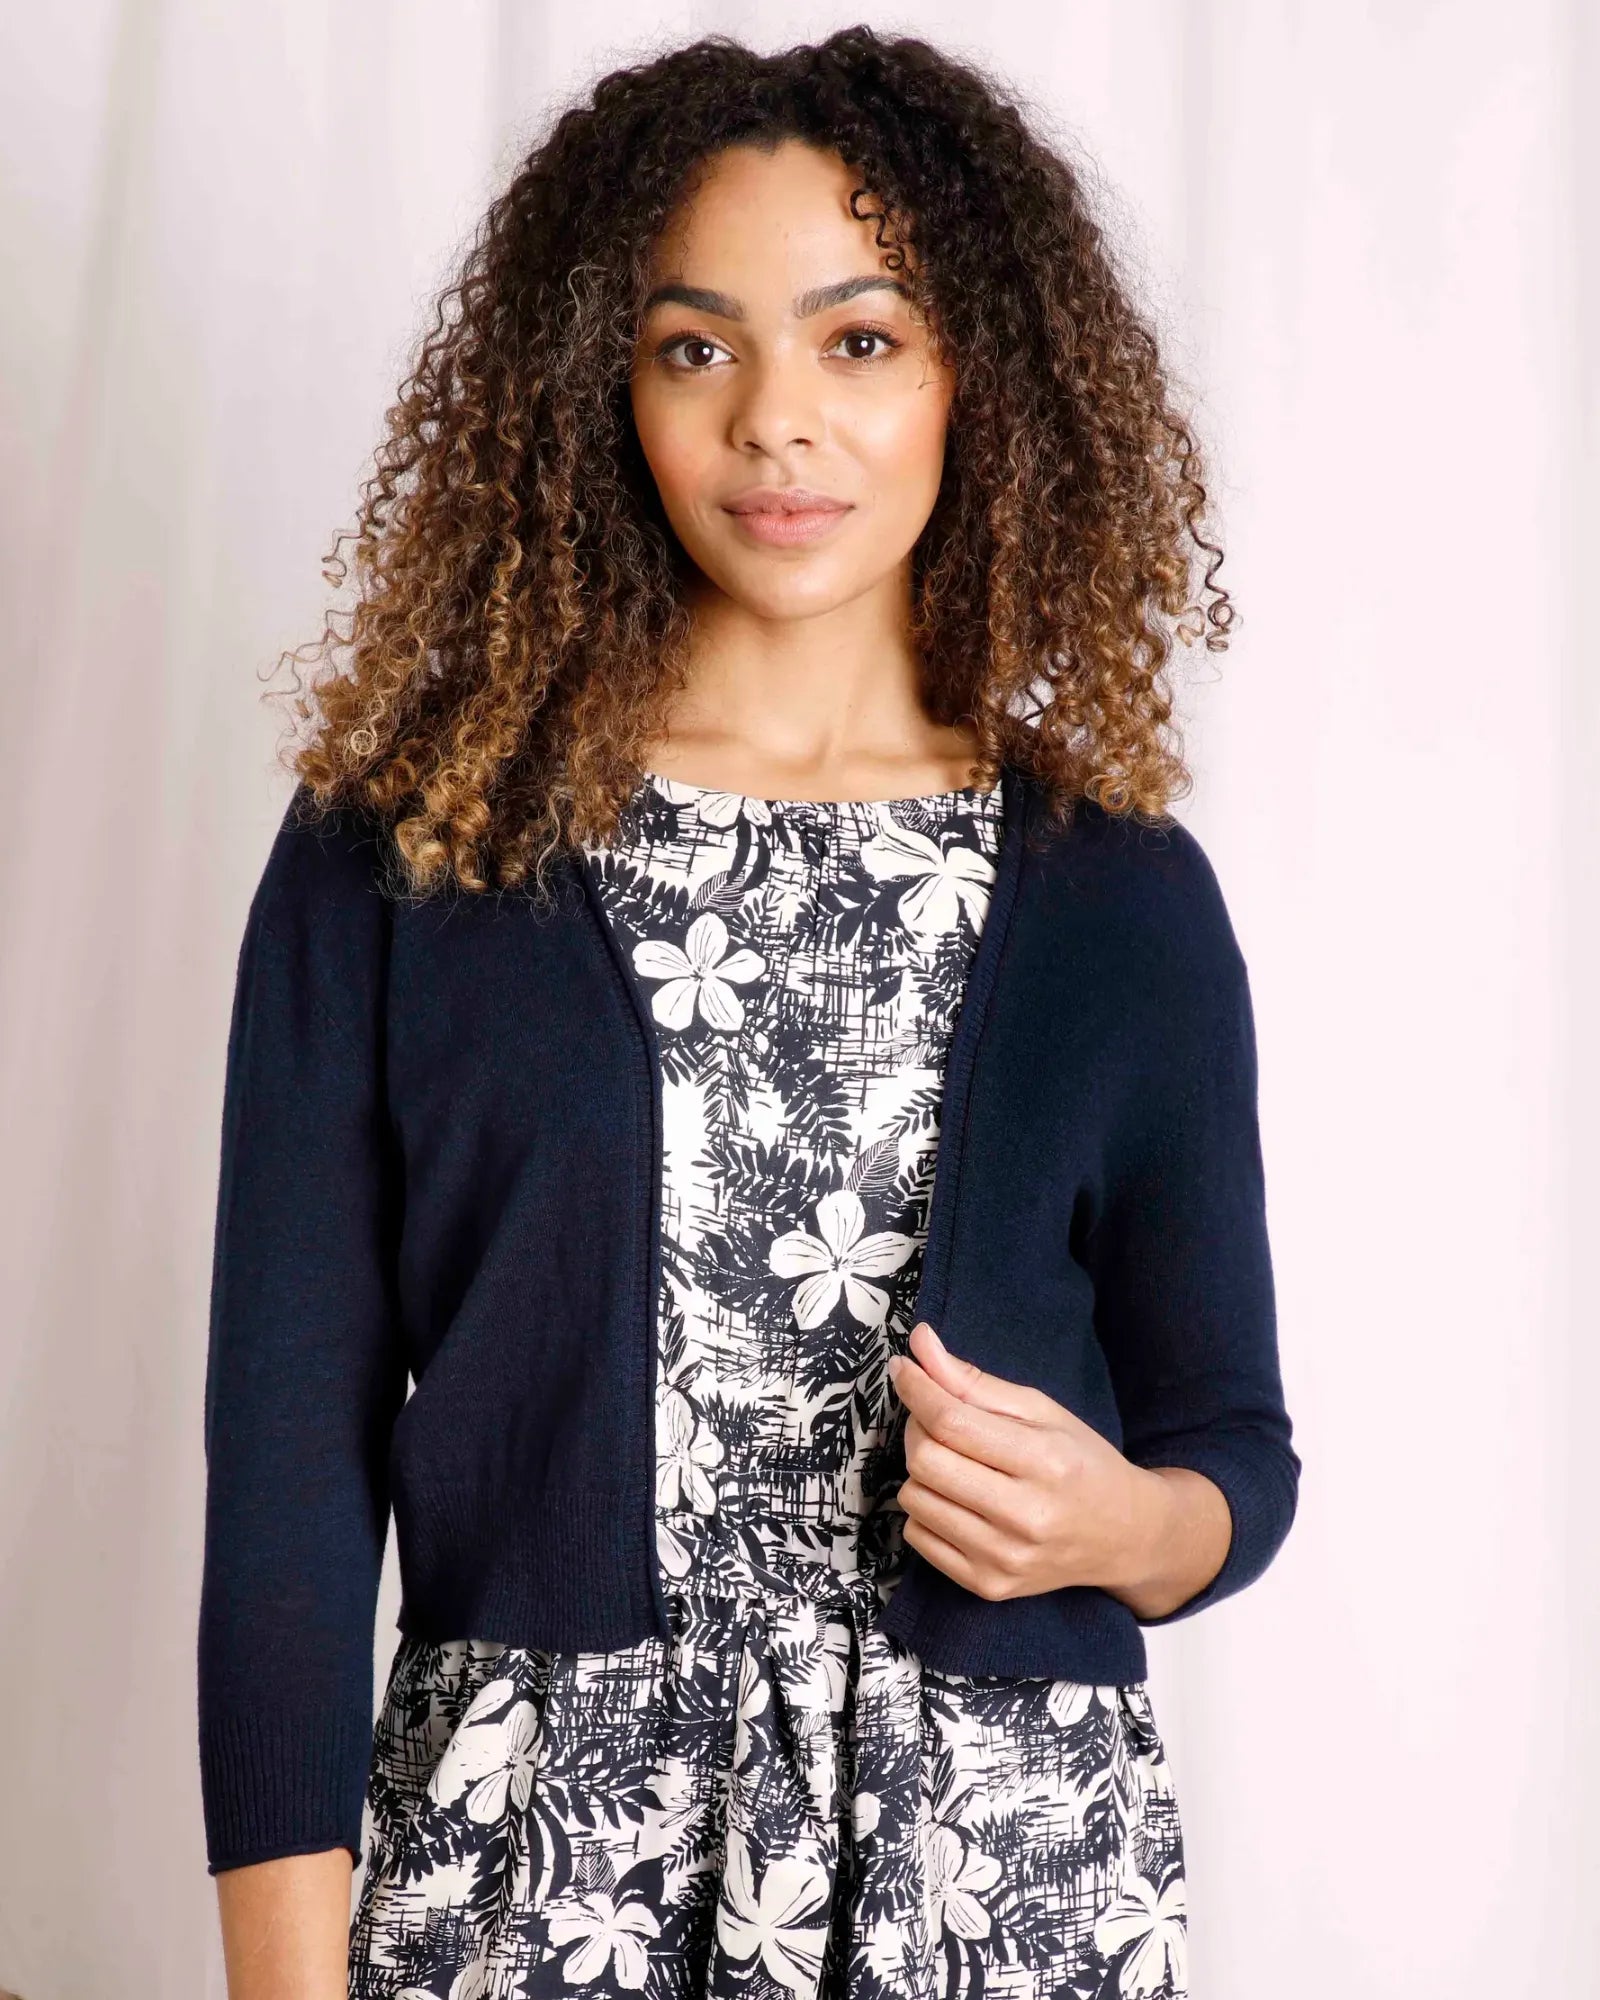 Limon Navy Outfitter Cardigan